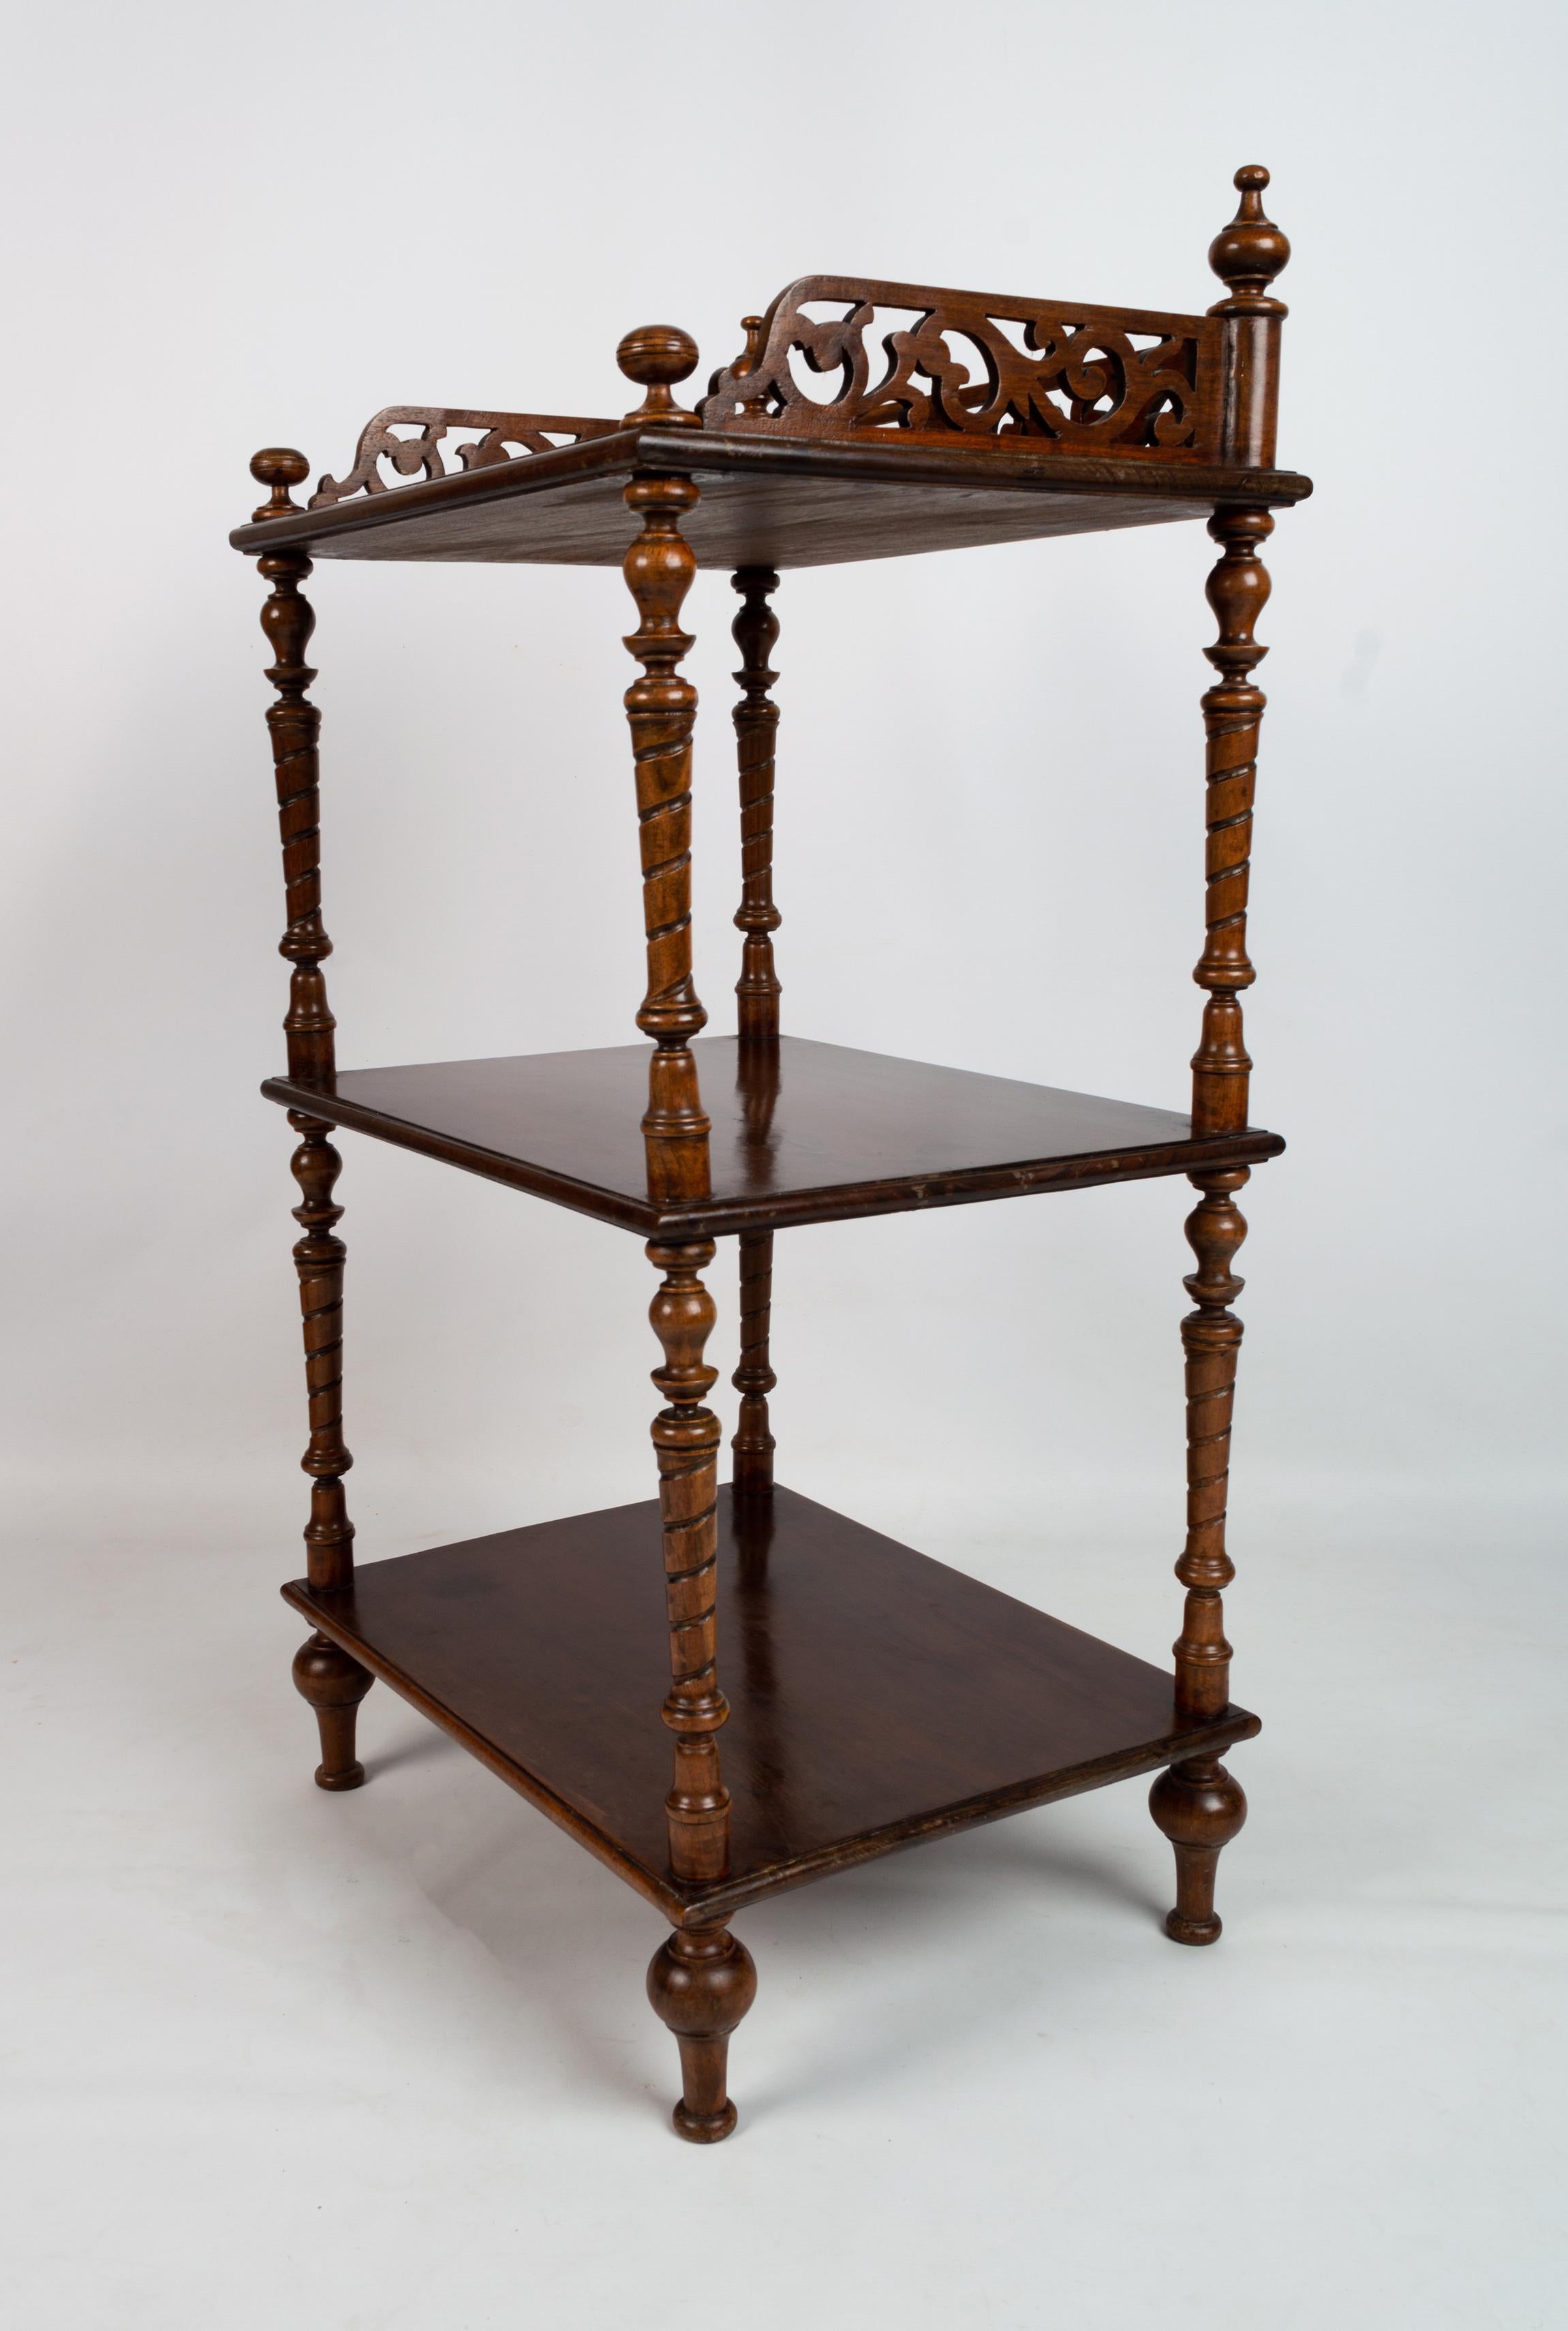 Antique English Victorian Carved Mahogany Whatnot Etagere Shelves C.1880 For Sale 1